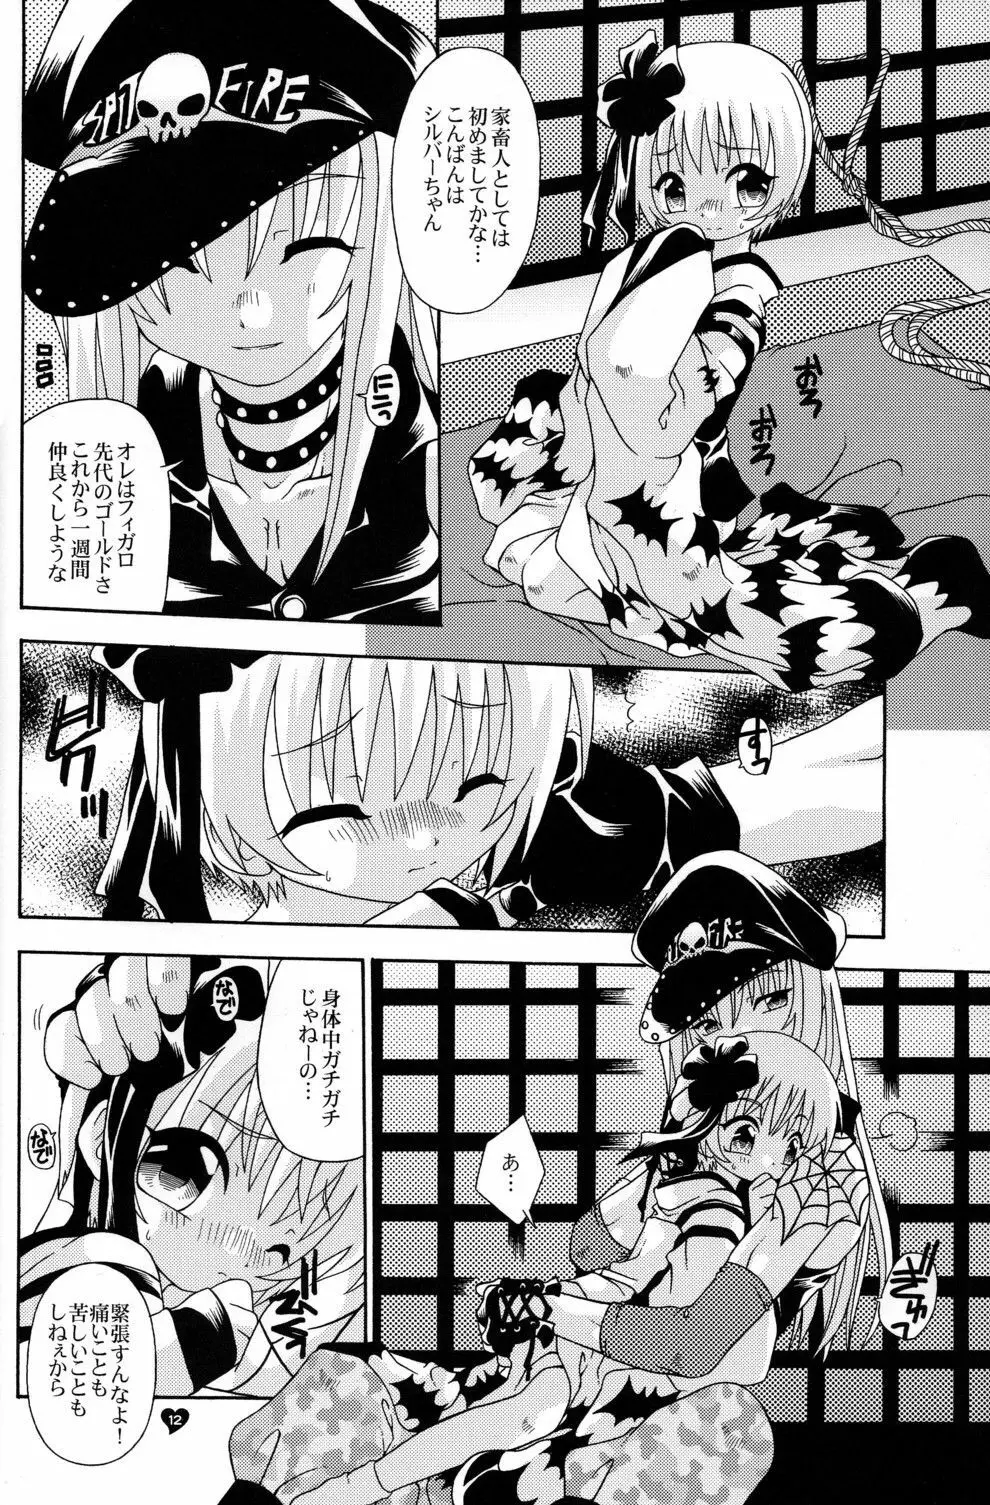 Spit Fire 2nd Stage Love & Death 3 Page.12